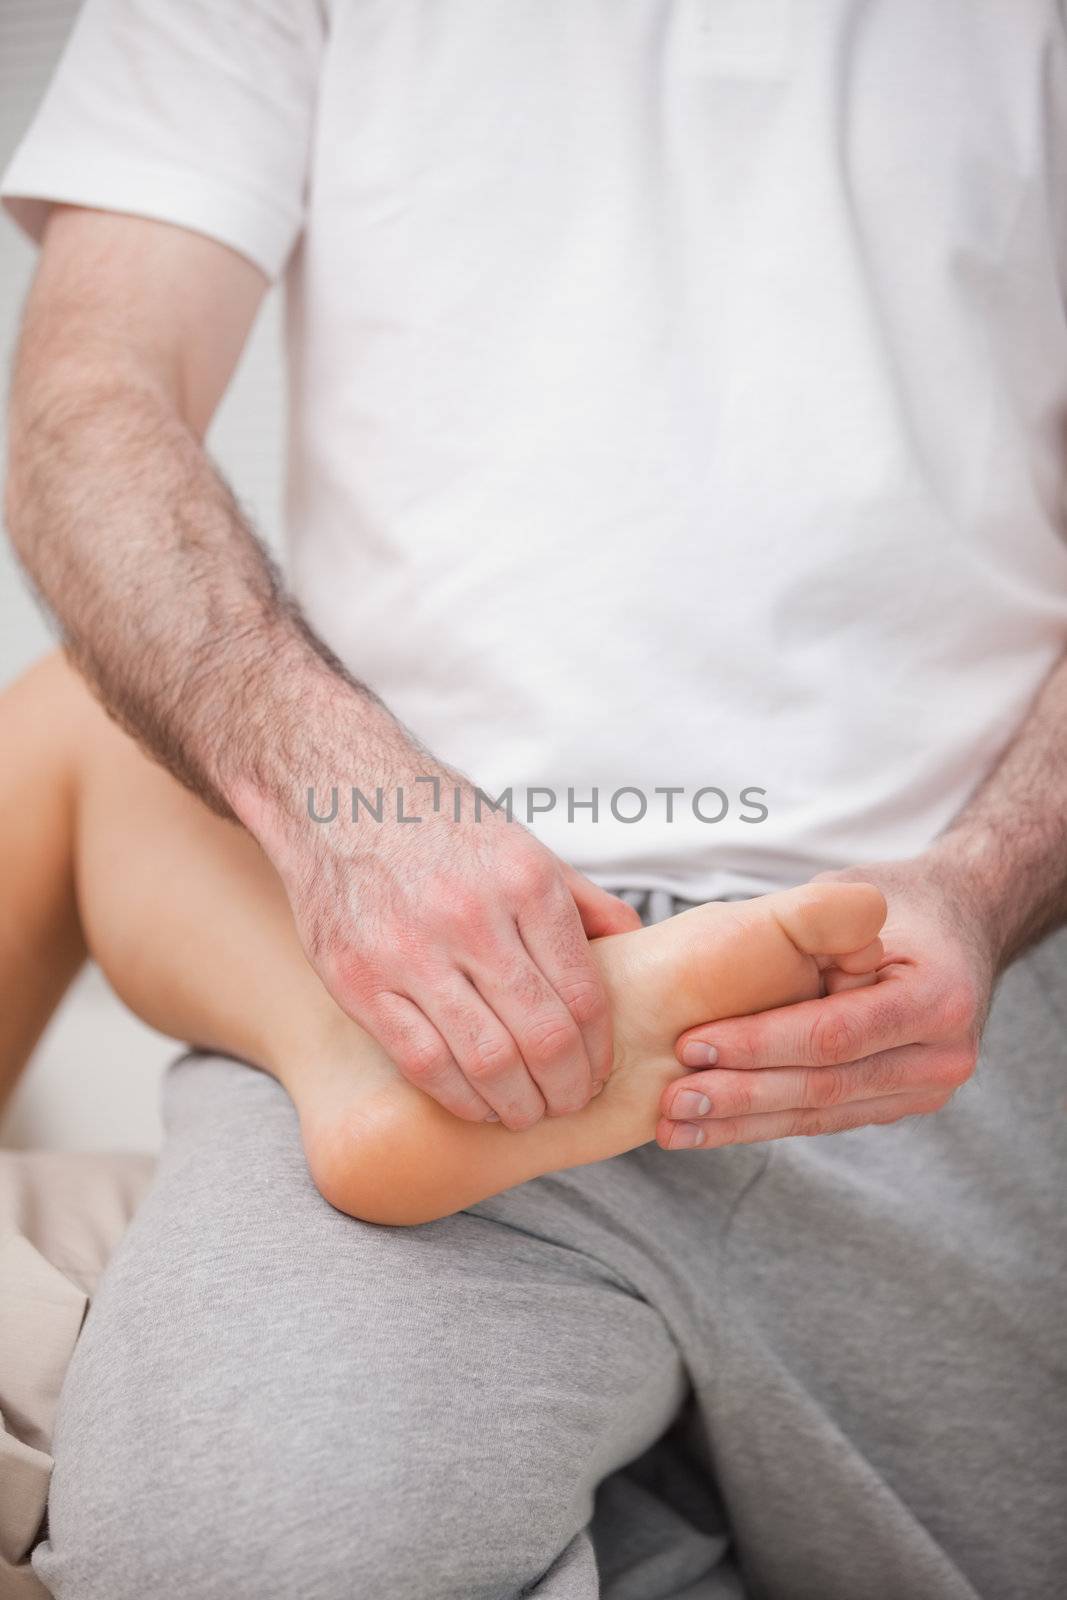 Reflexologist manipulating the sole of the patient in a room